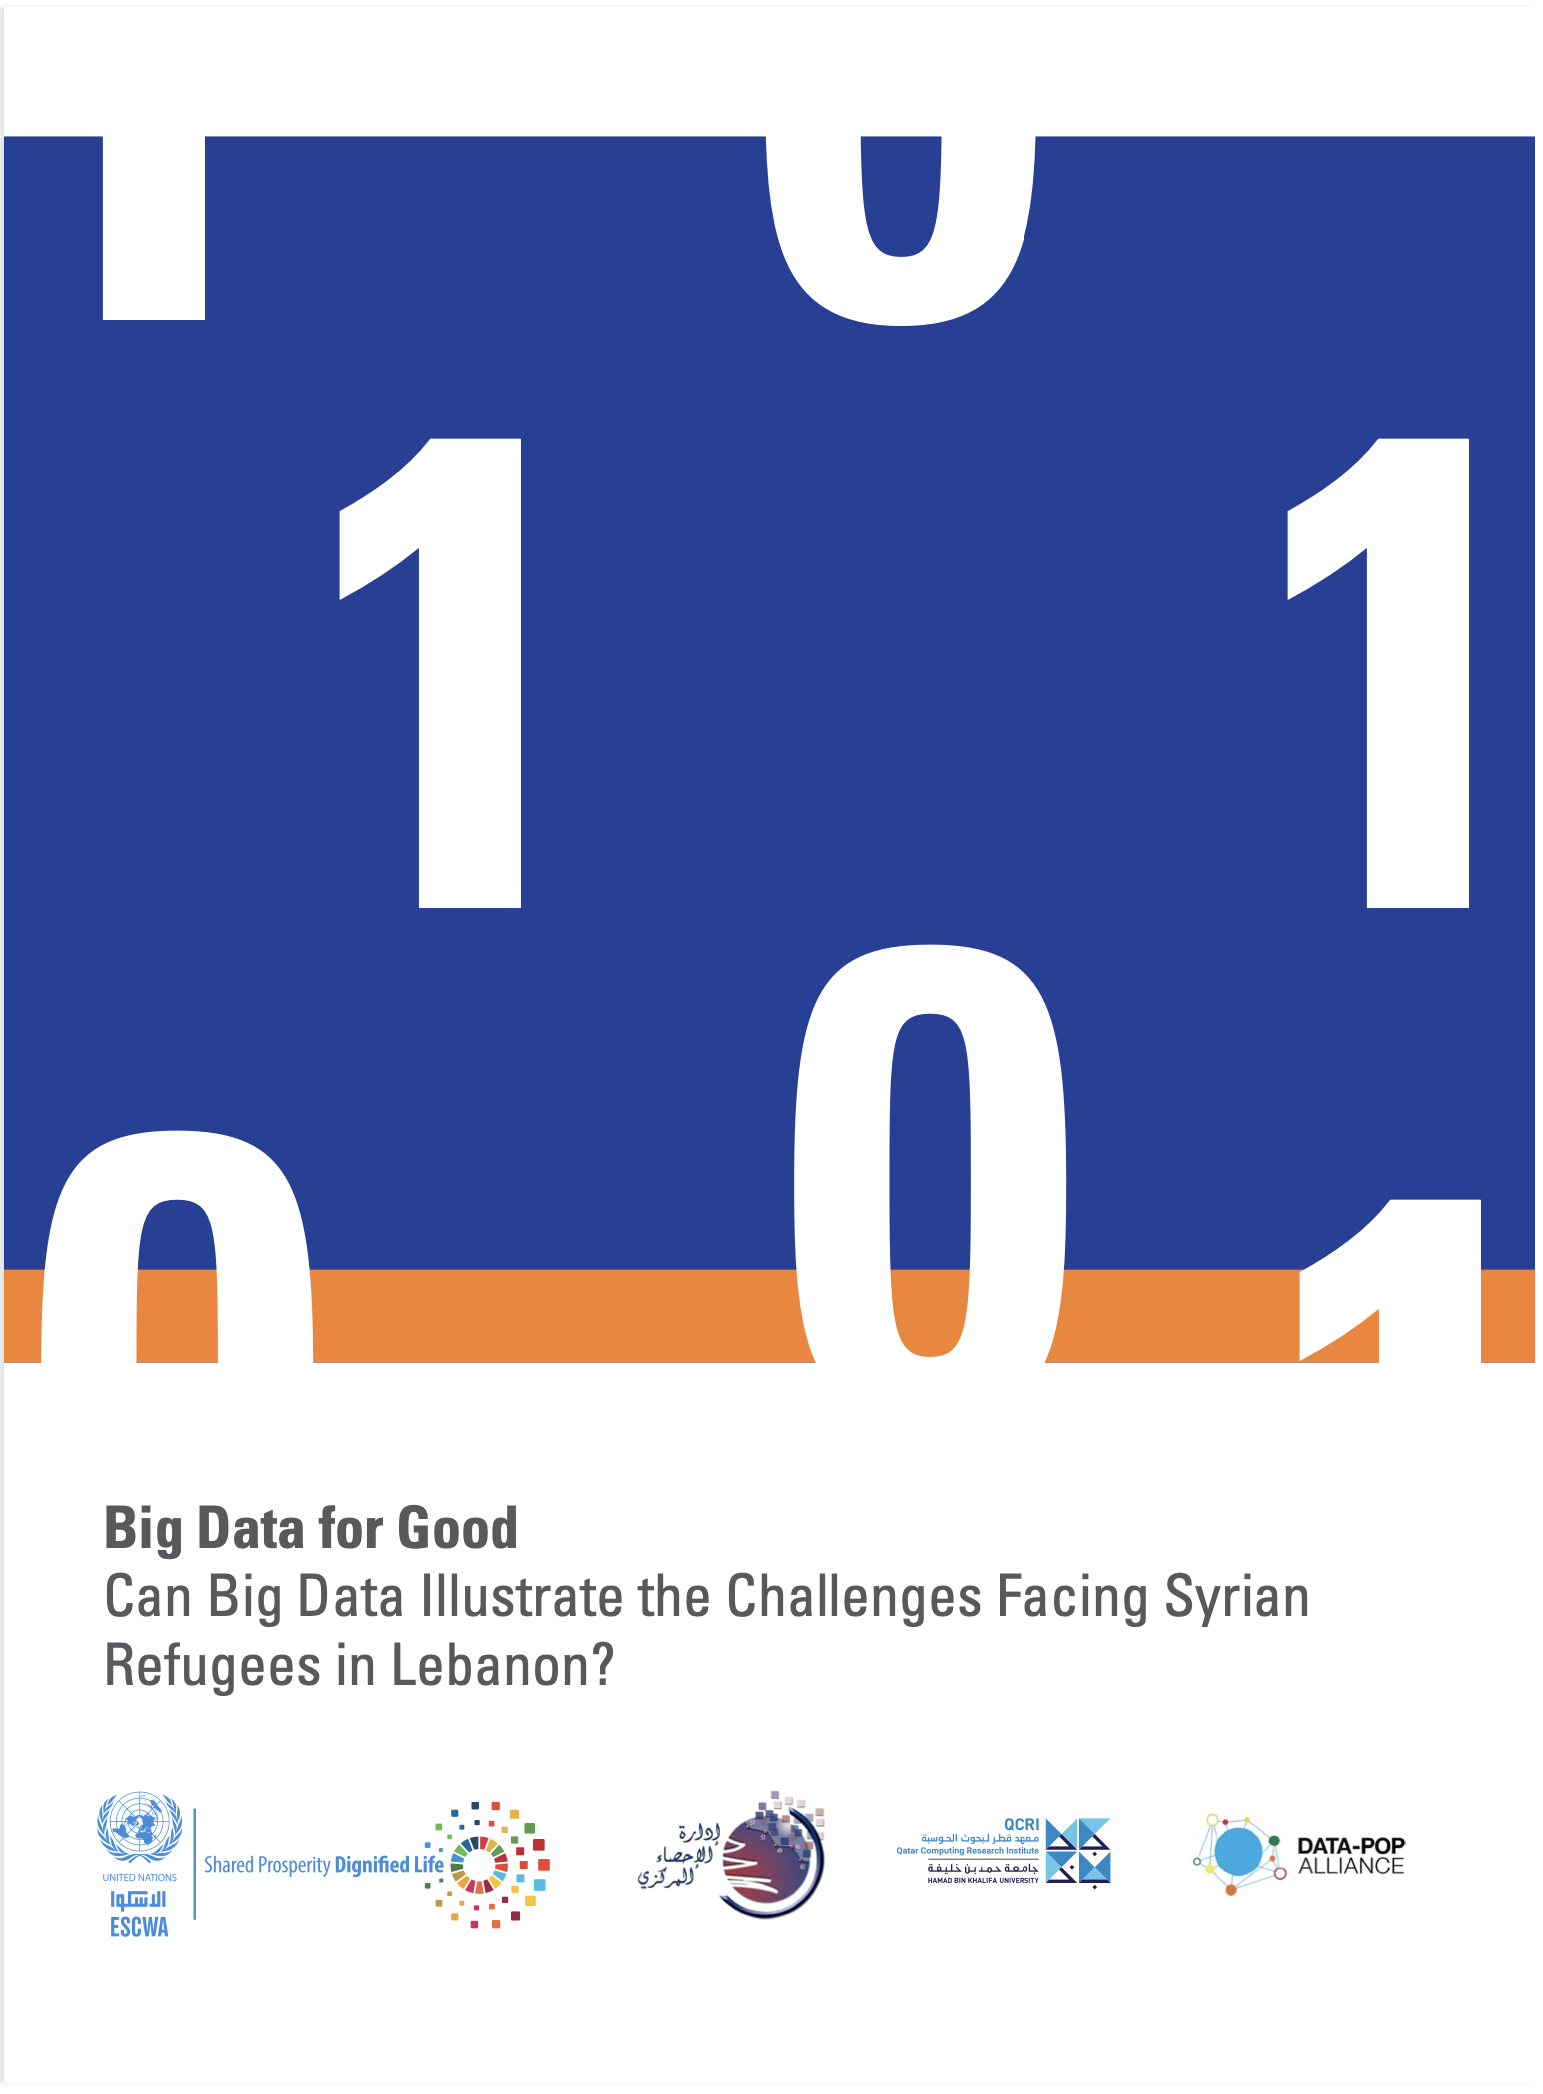 Big Data for Good. Can Big Data Illustrate the Challenges Facing Syrian Refugees in Lebanon?